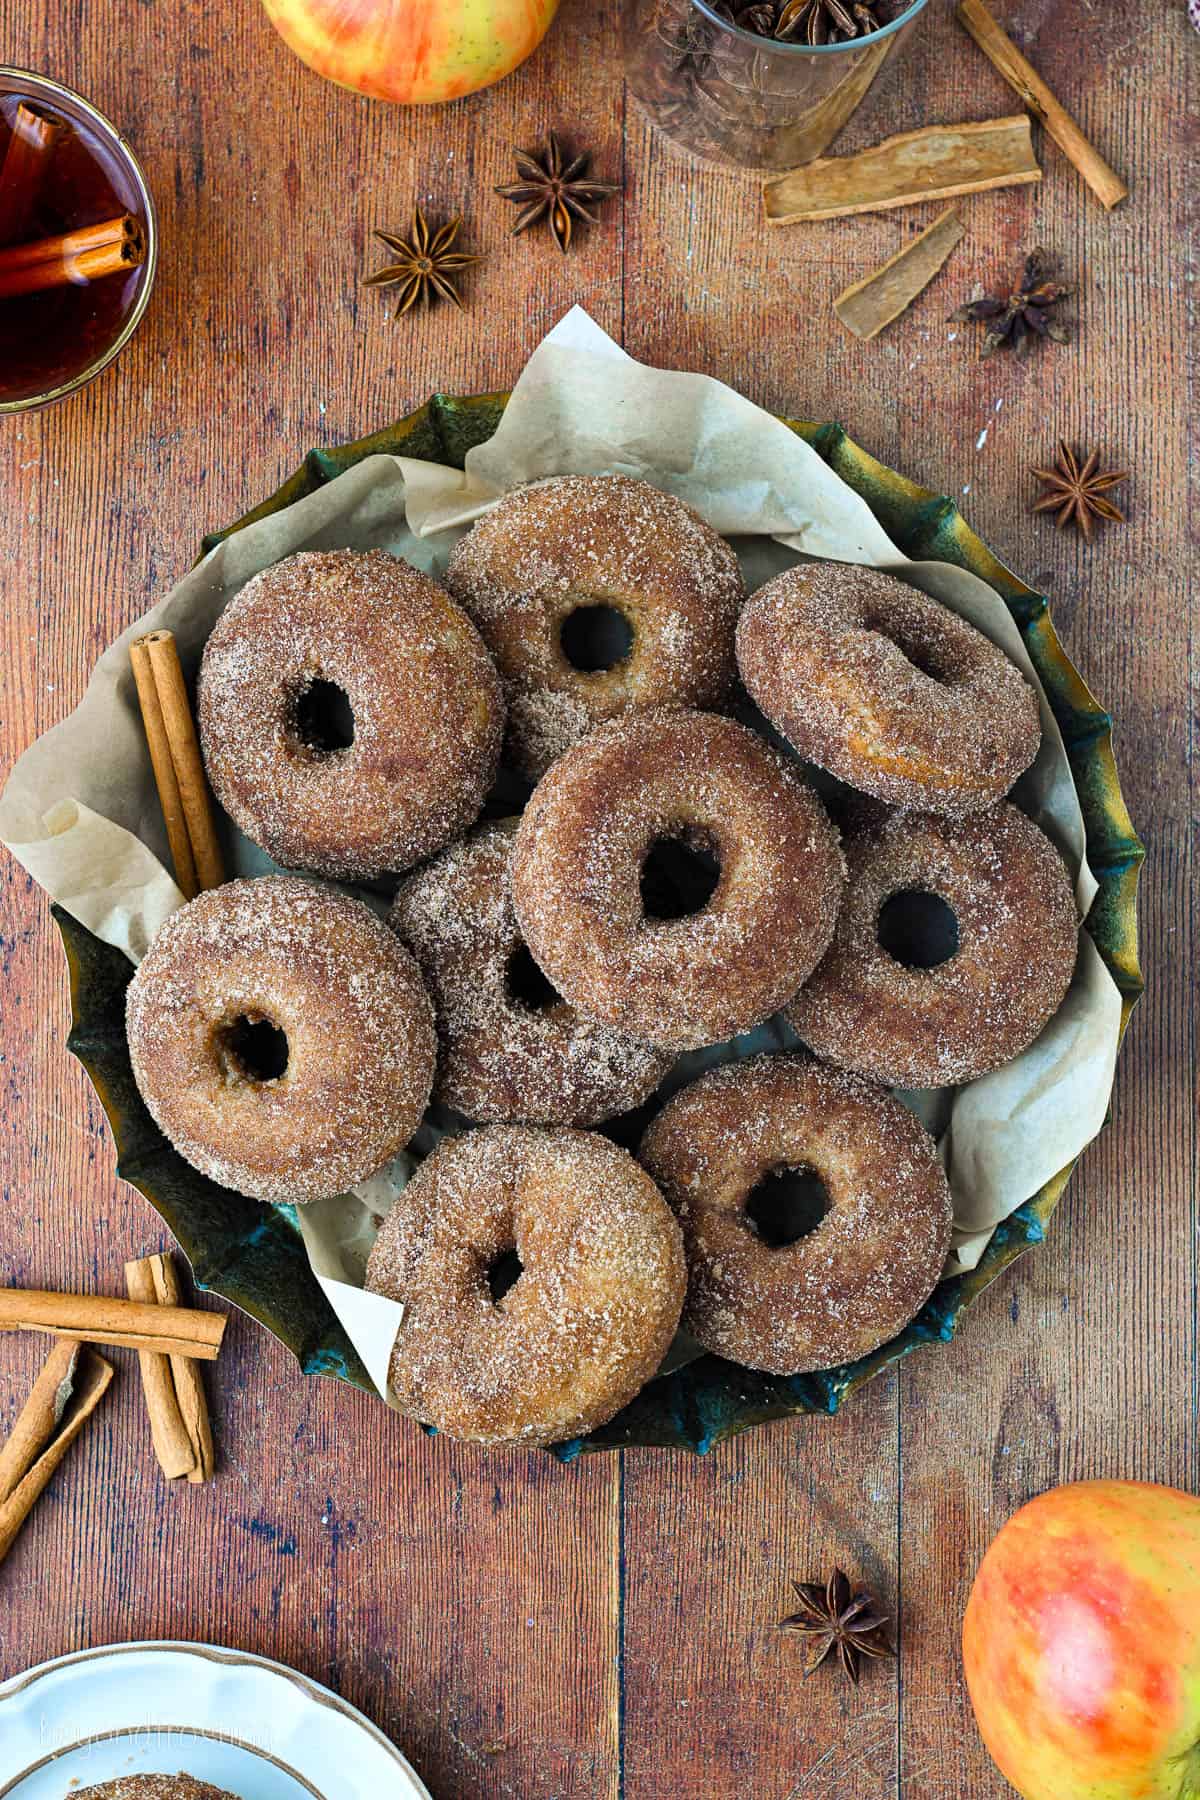 How To Store Apple Cider Donuts